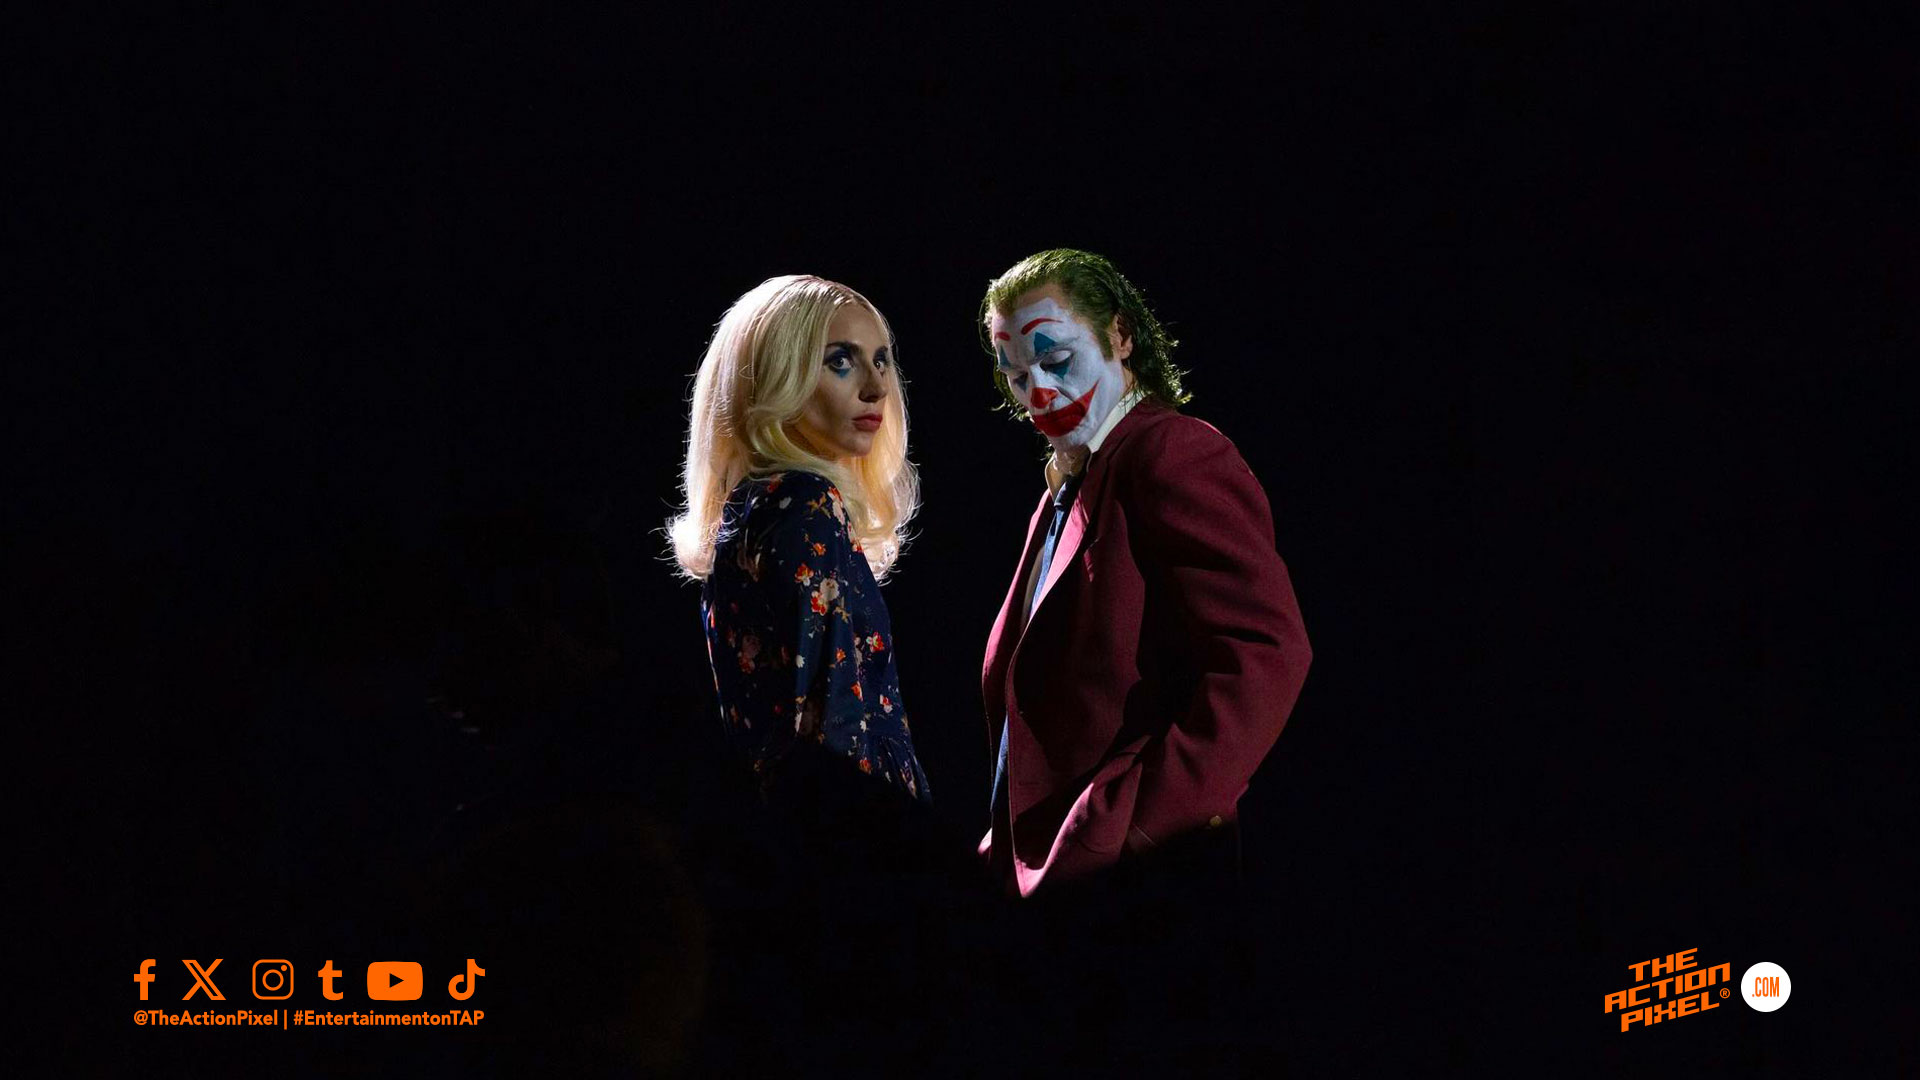 joker 2, Joker: folie à Deux, Joker folie à Deux, joker folie a deux, entertainment on tap, featured, lady gaga, joaquin phoenix, joker, featured, valentines day , release date, october 4, 2024, the action pixel, dc comics, dc films, dc, joker 2 movie, joker 2, featured